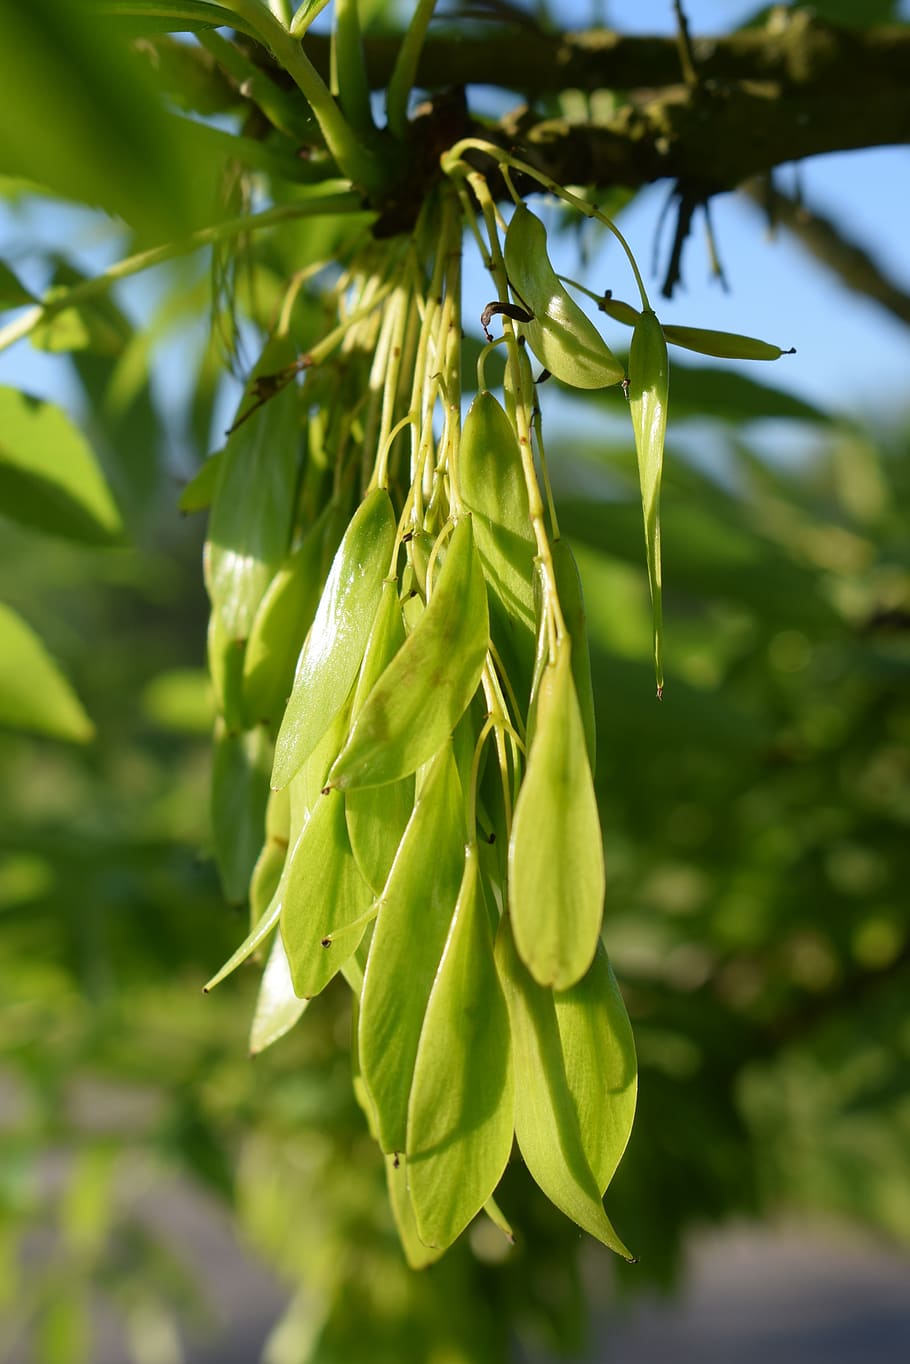 ash, seeds, tree, plant, growth, green color, close-up, beauty in nature, focus on foreground, nature